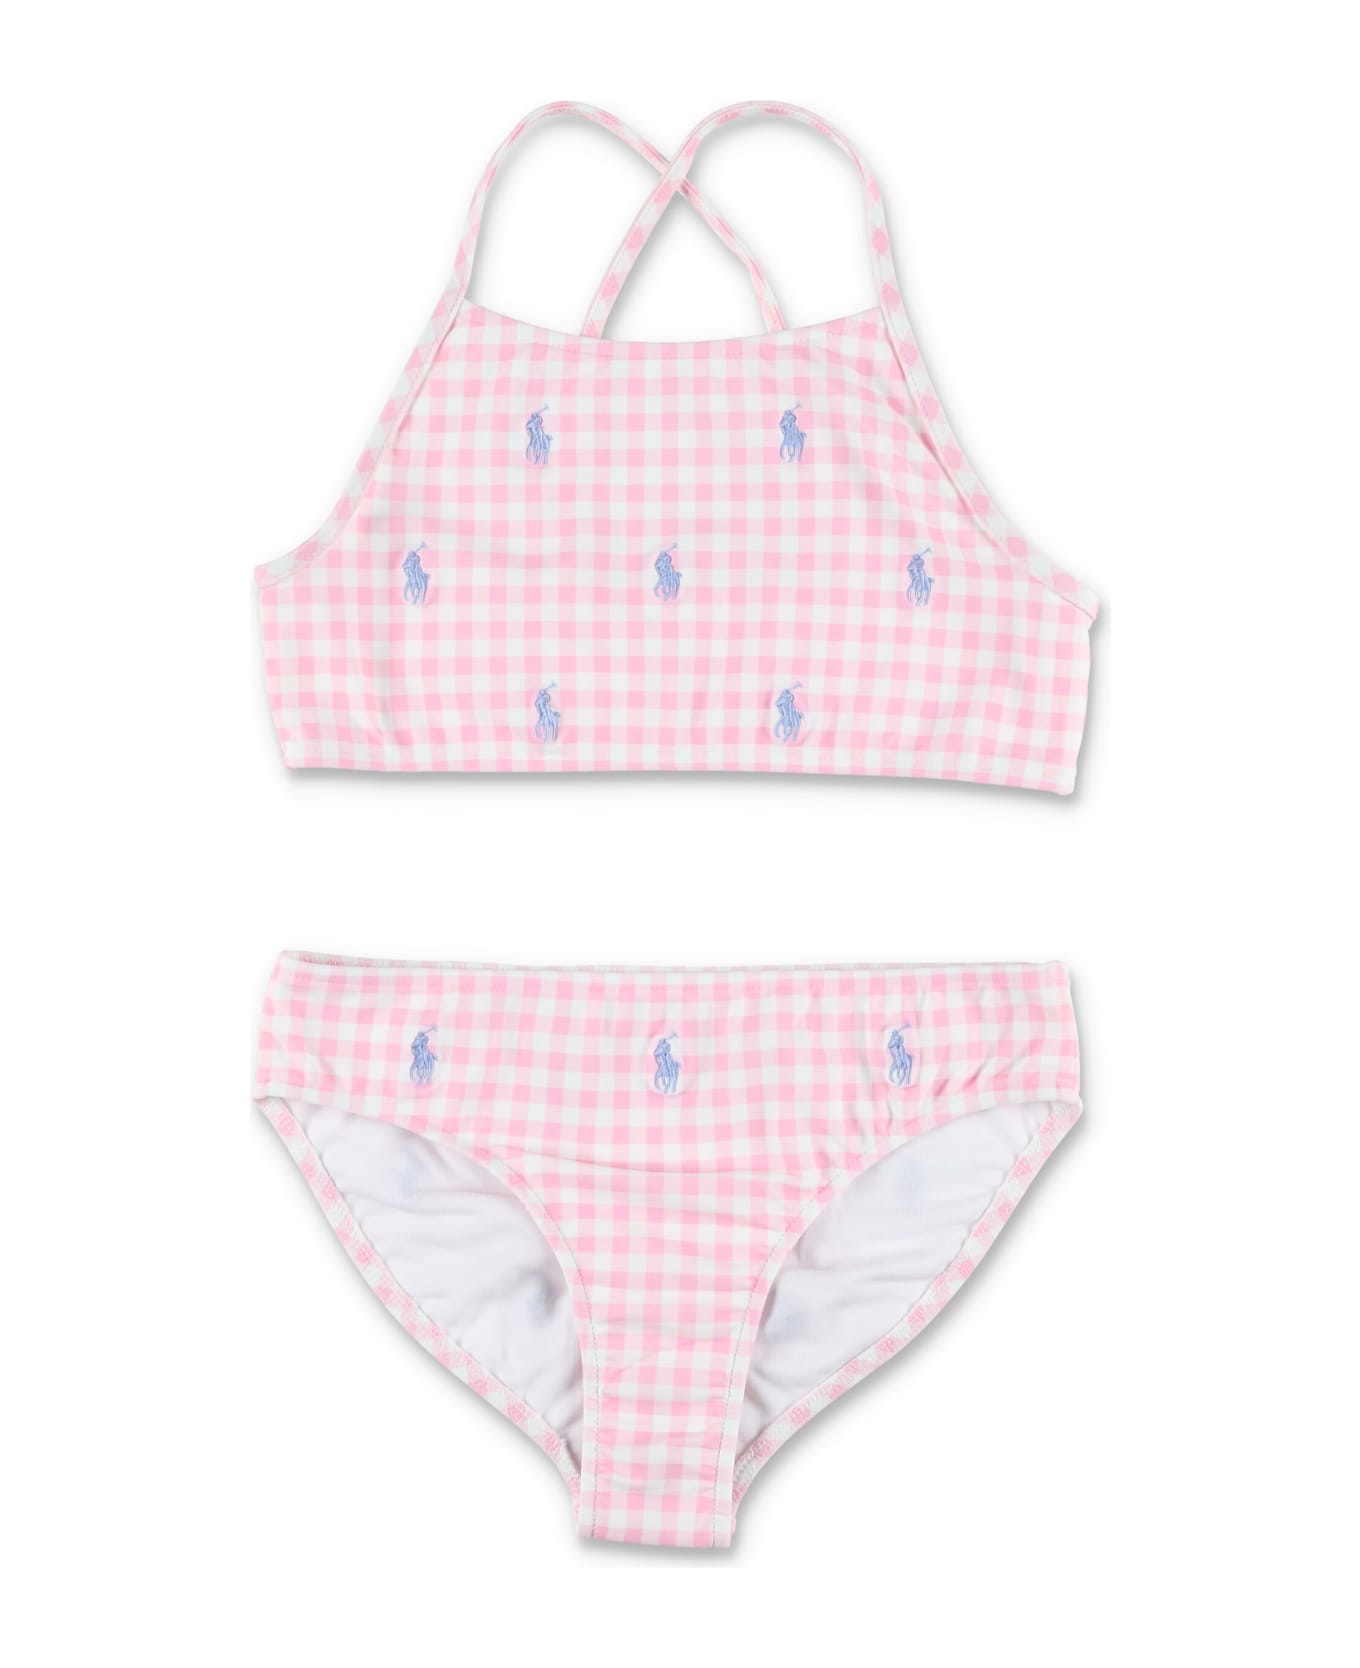 Polo Ralph Lauren Gingham Polo Pony Two-piece Swimsuit - PINK 水着